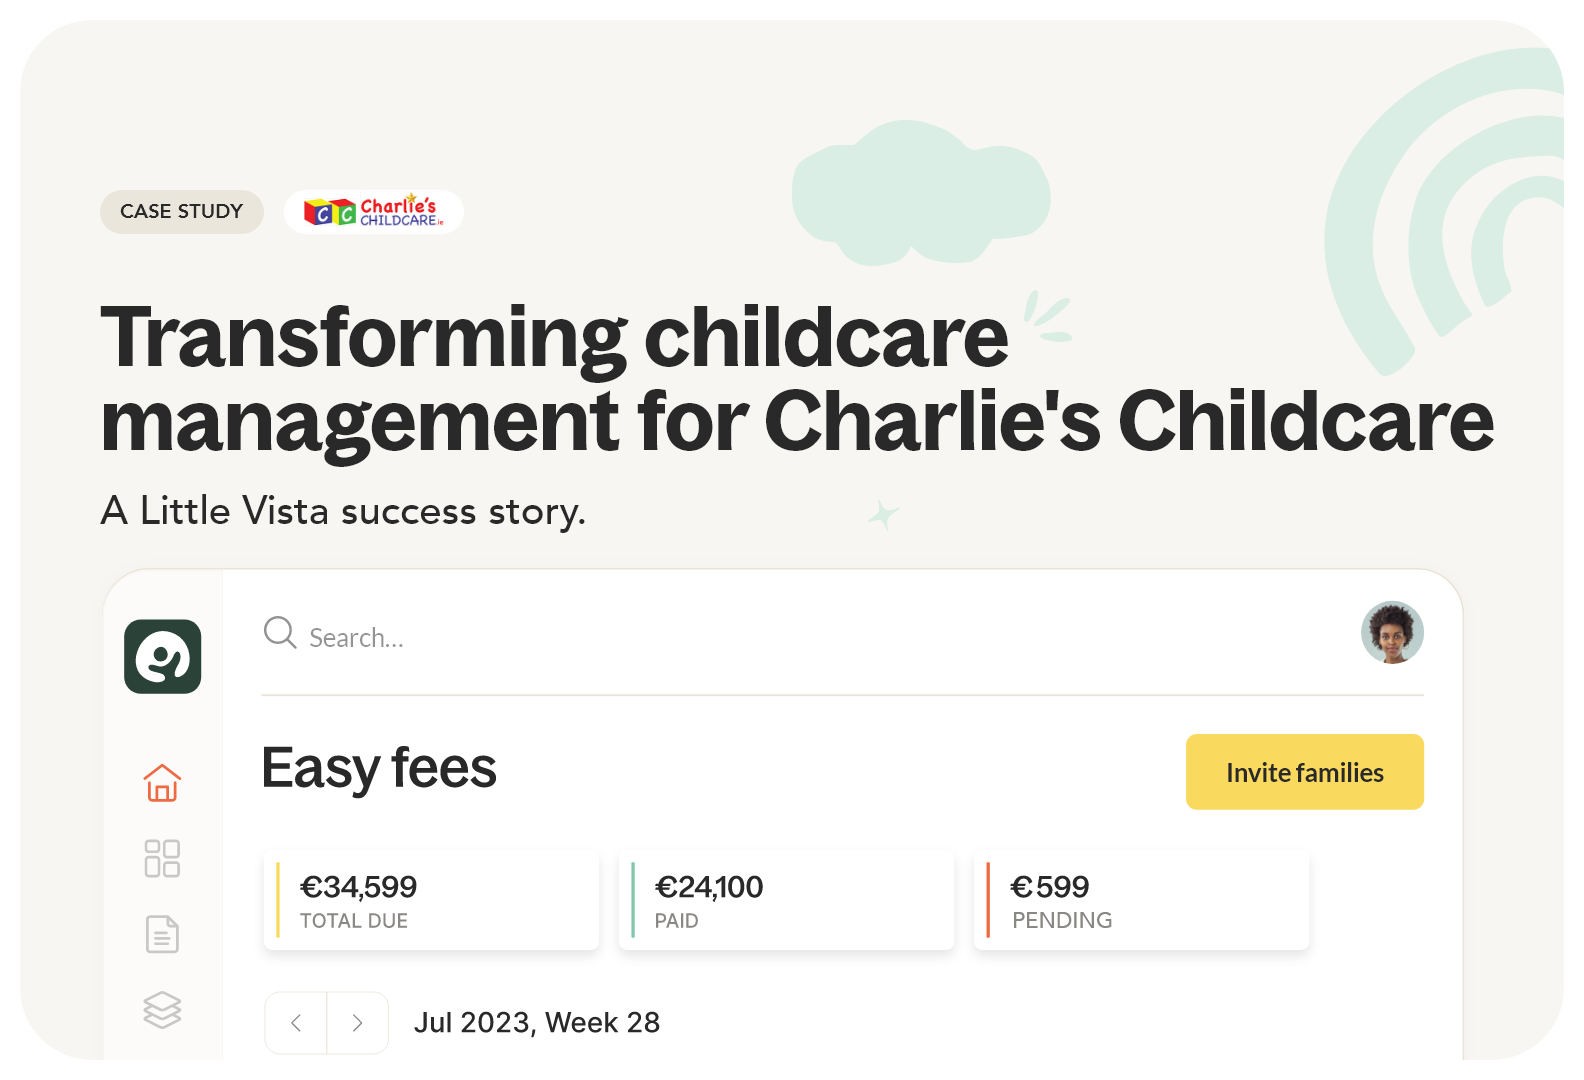 Simplified Operations: Charlie’s Childcare’s Success with Little Vista